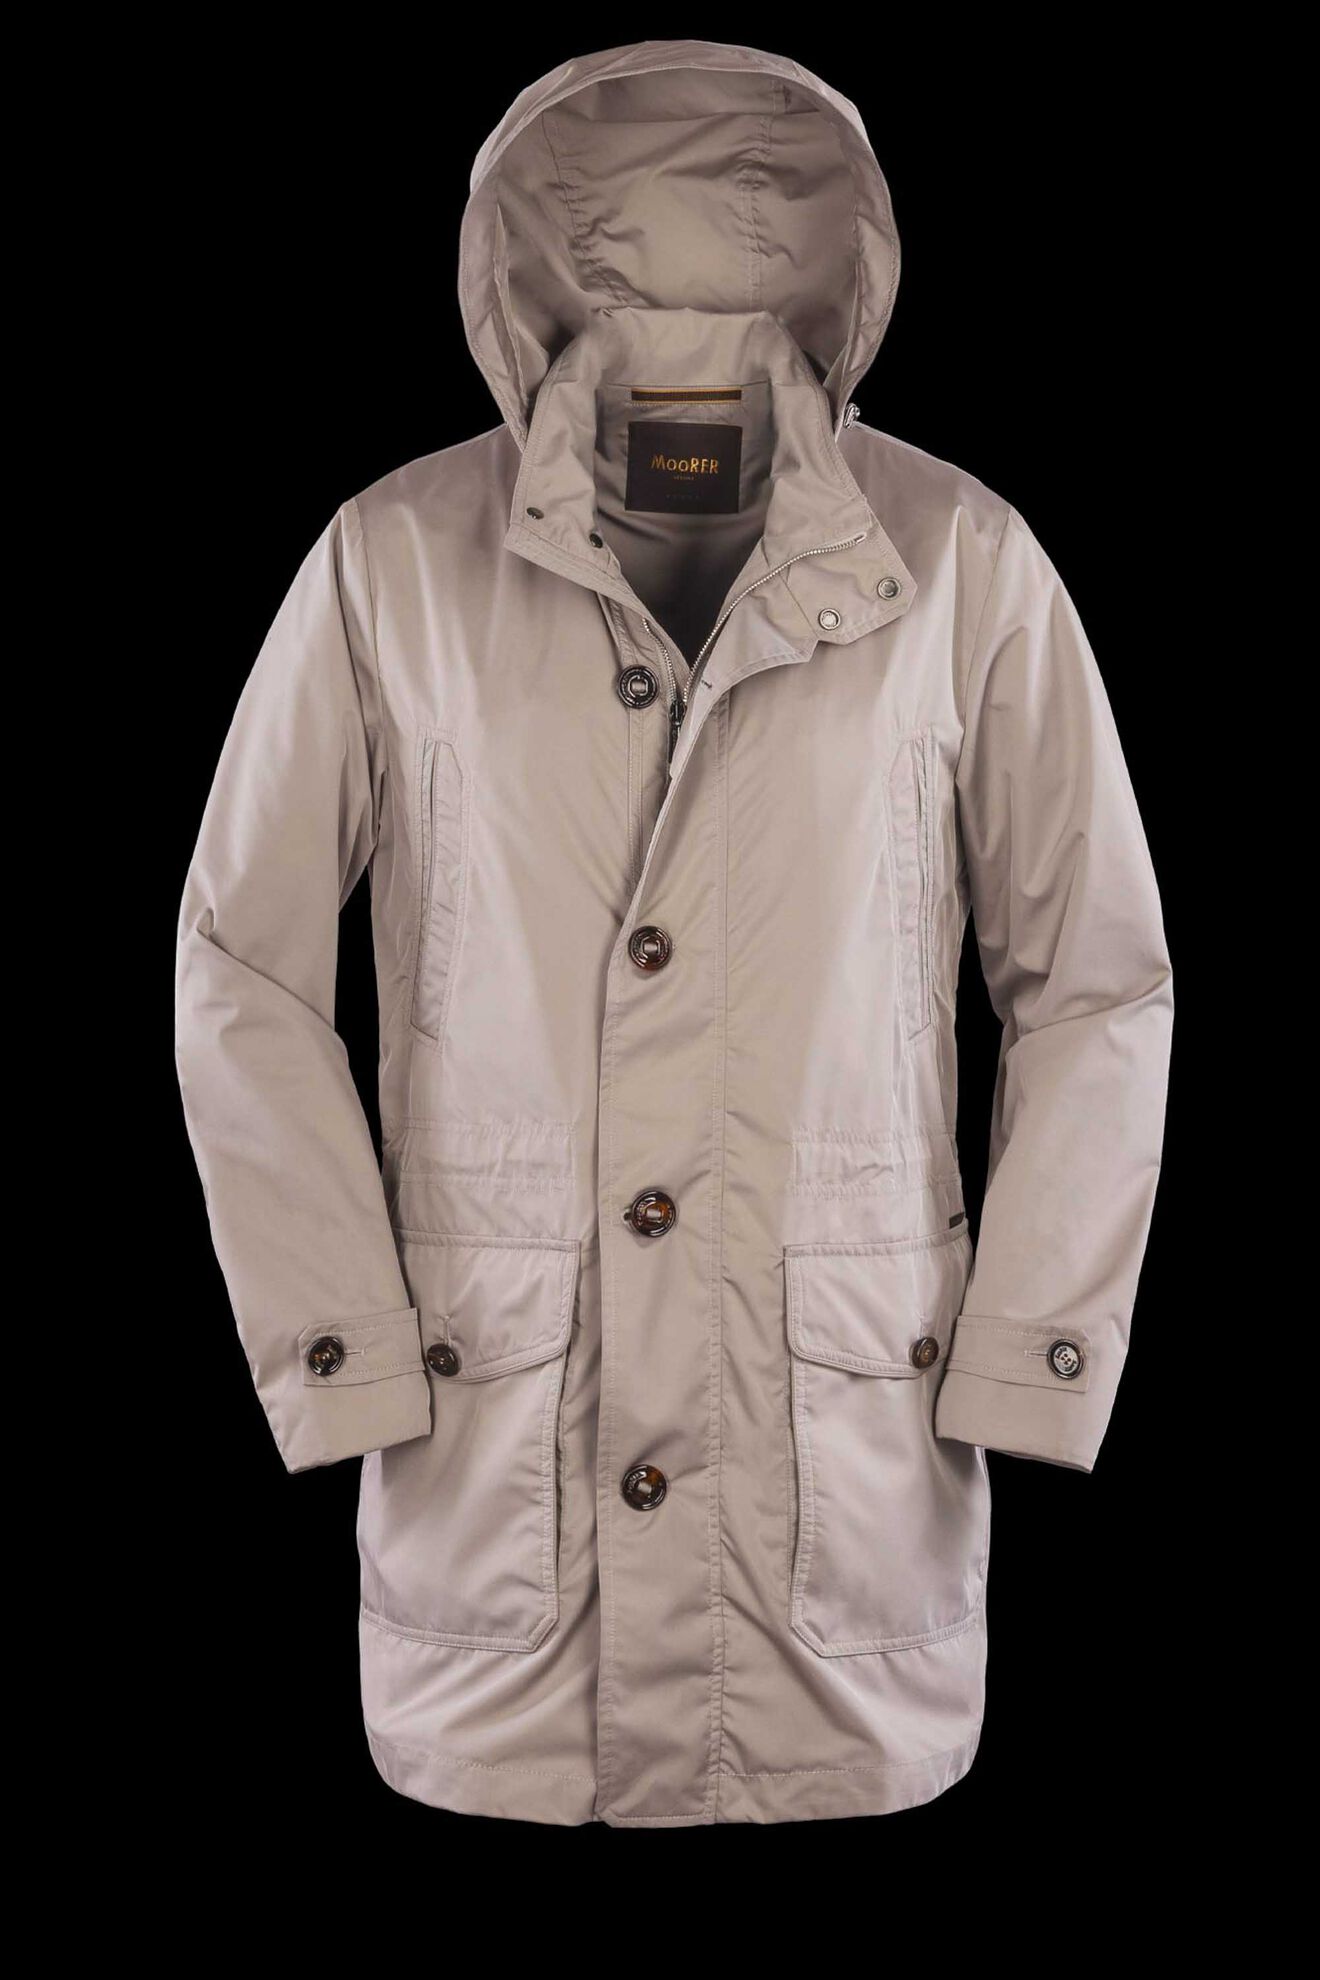 Unlock Wilderness' choice in the MooRER Vs Moncler comparison, the SI-TORINO-WK by MooRER